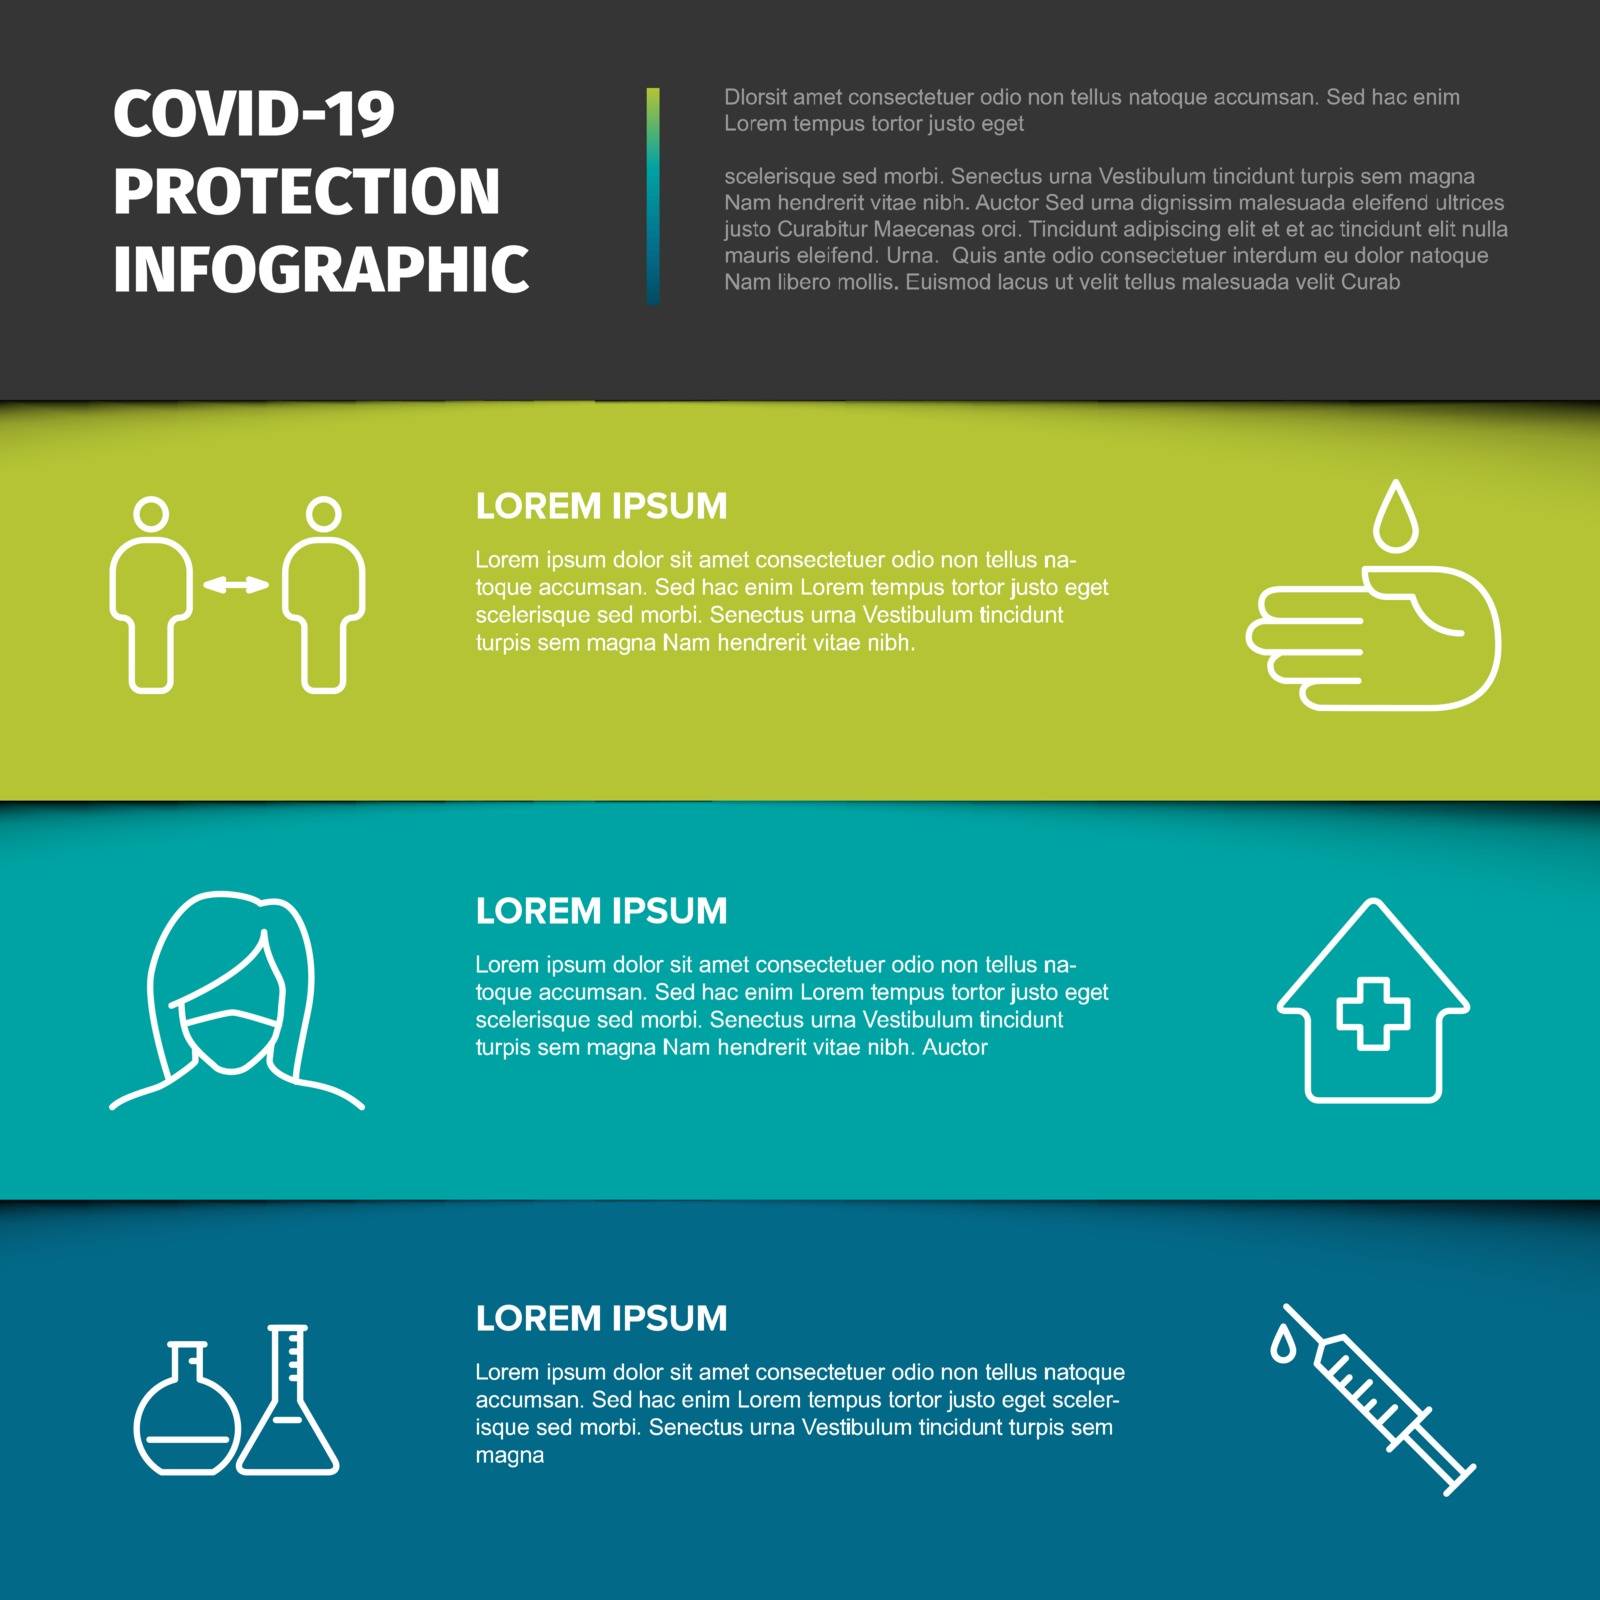 Covid-19 prevention infographic template by orson